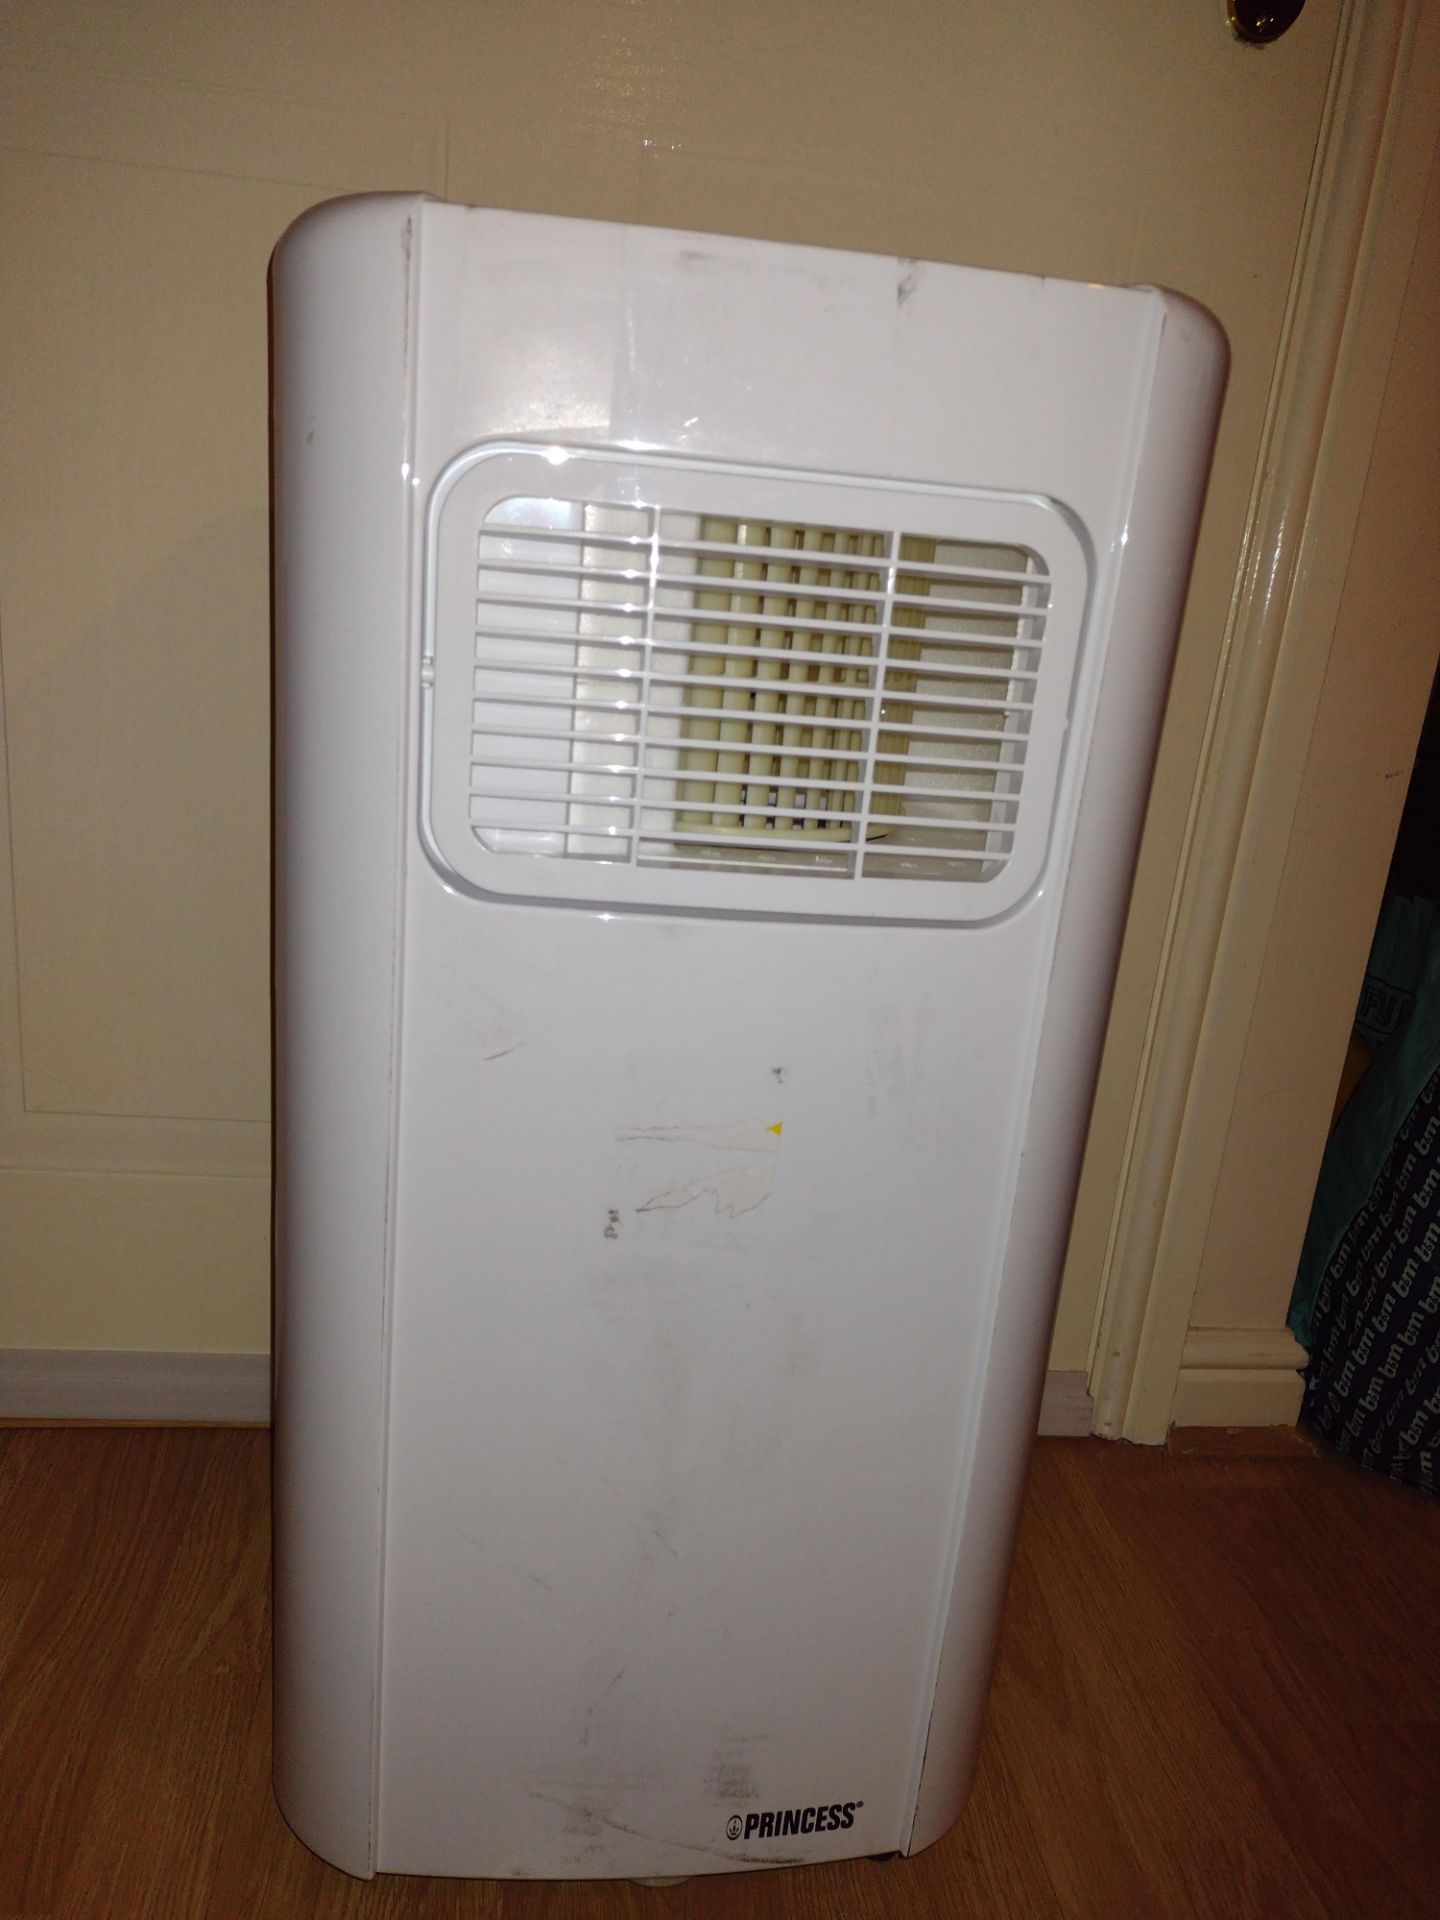 Princess 7000BTU/h 785w A-Energy Rated 3-in-1 Portable Air Conditioner (RRP £300) - Image 2 of 4